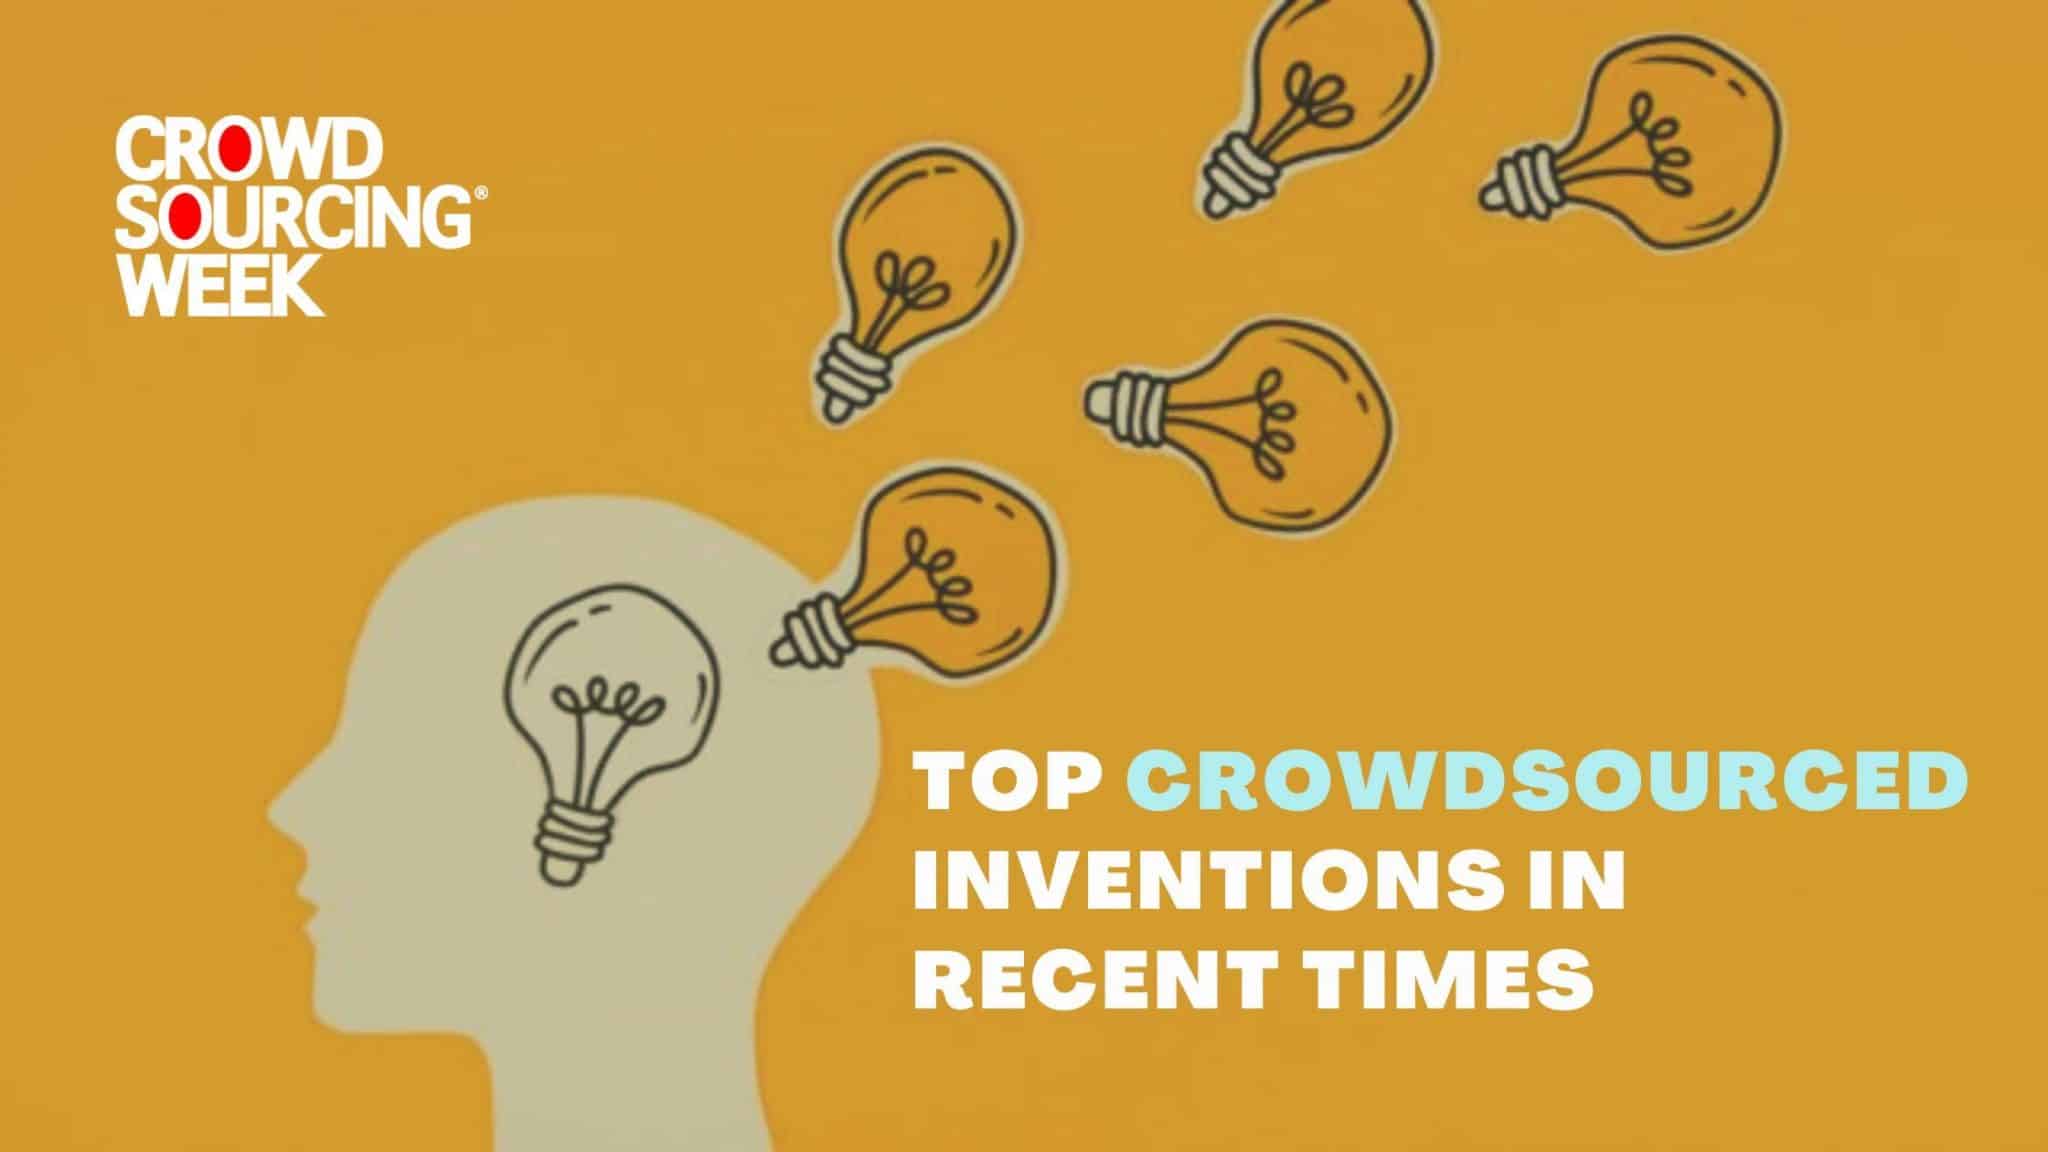 Top Crowdsourced Inventions In Recent Times - Crowdsourcing Week